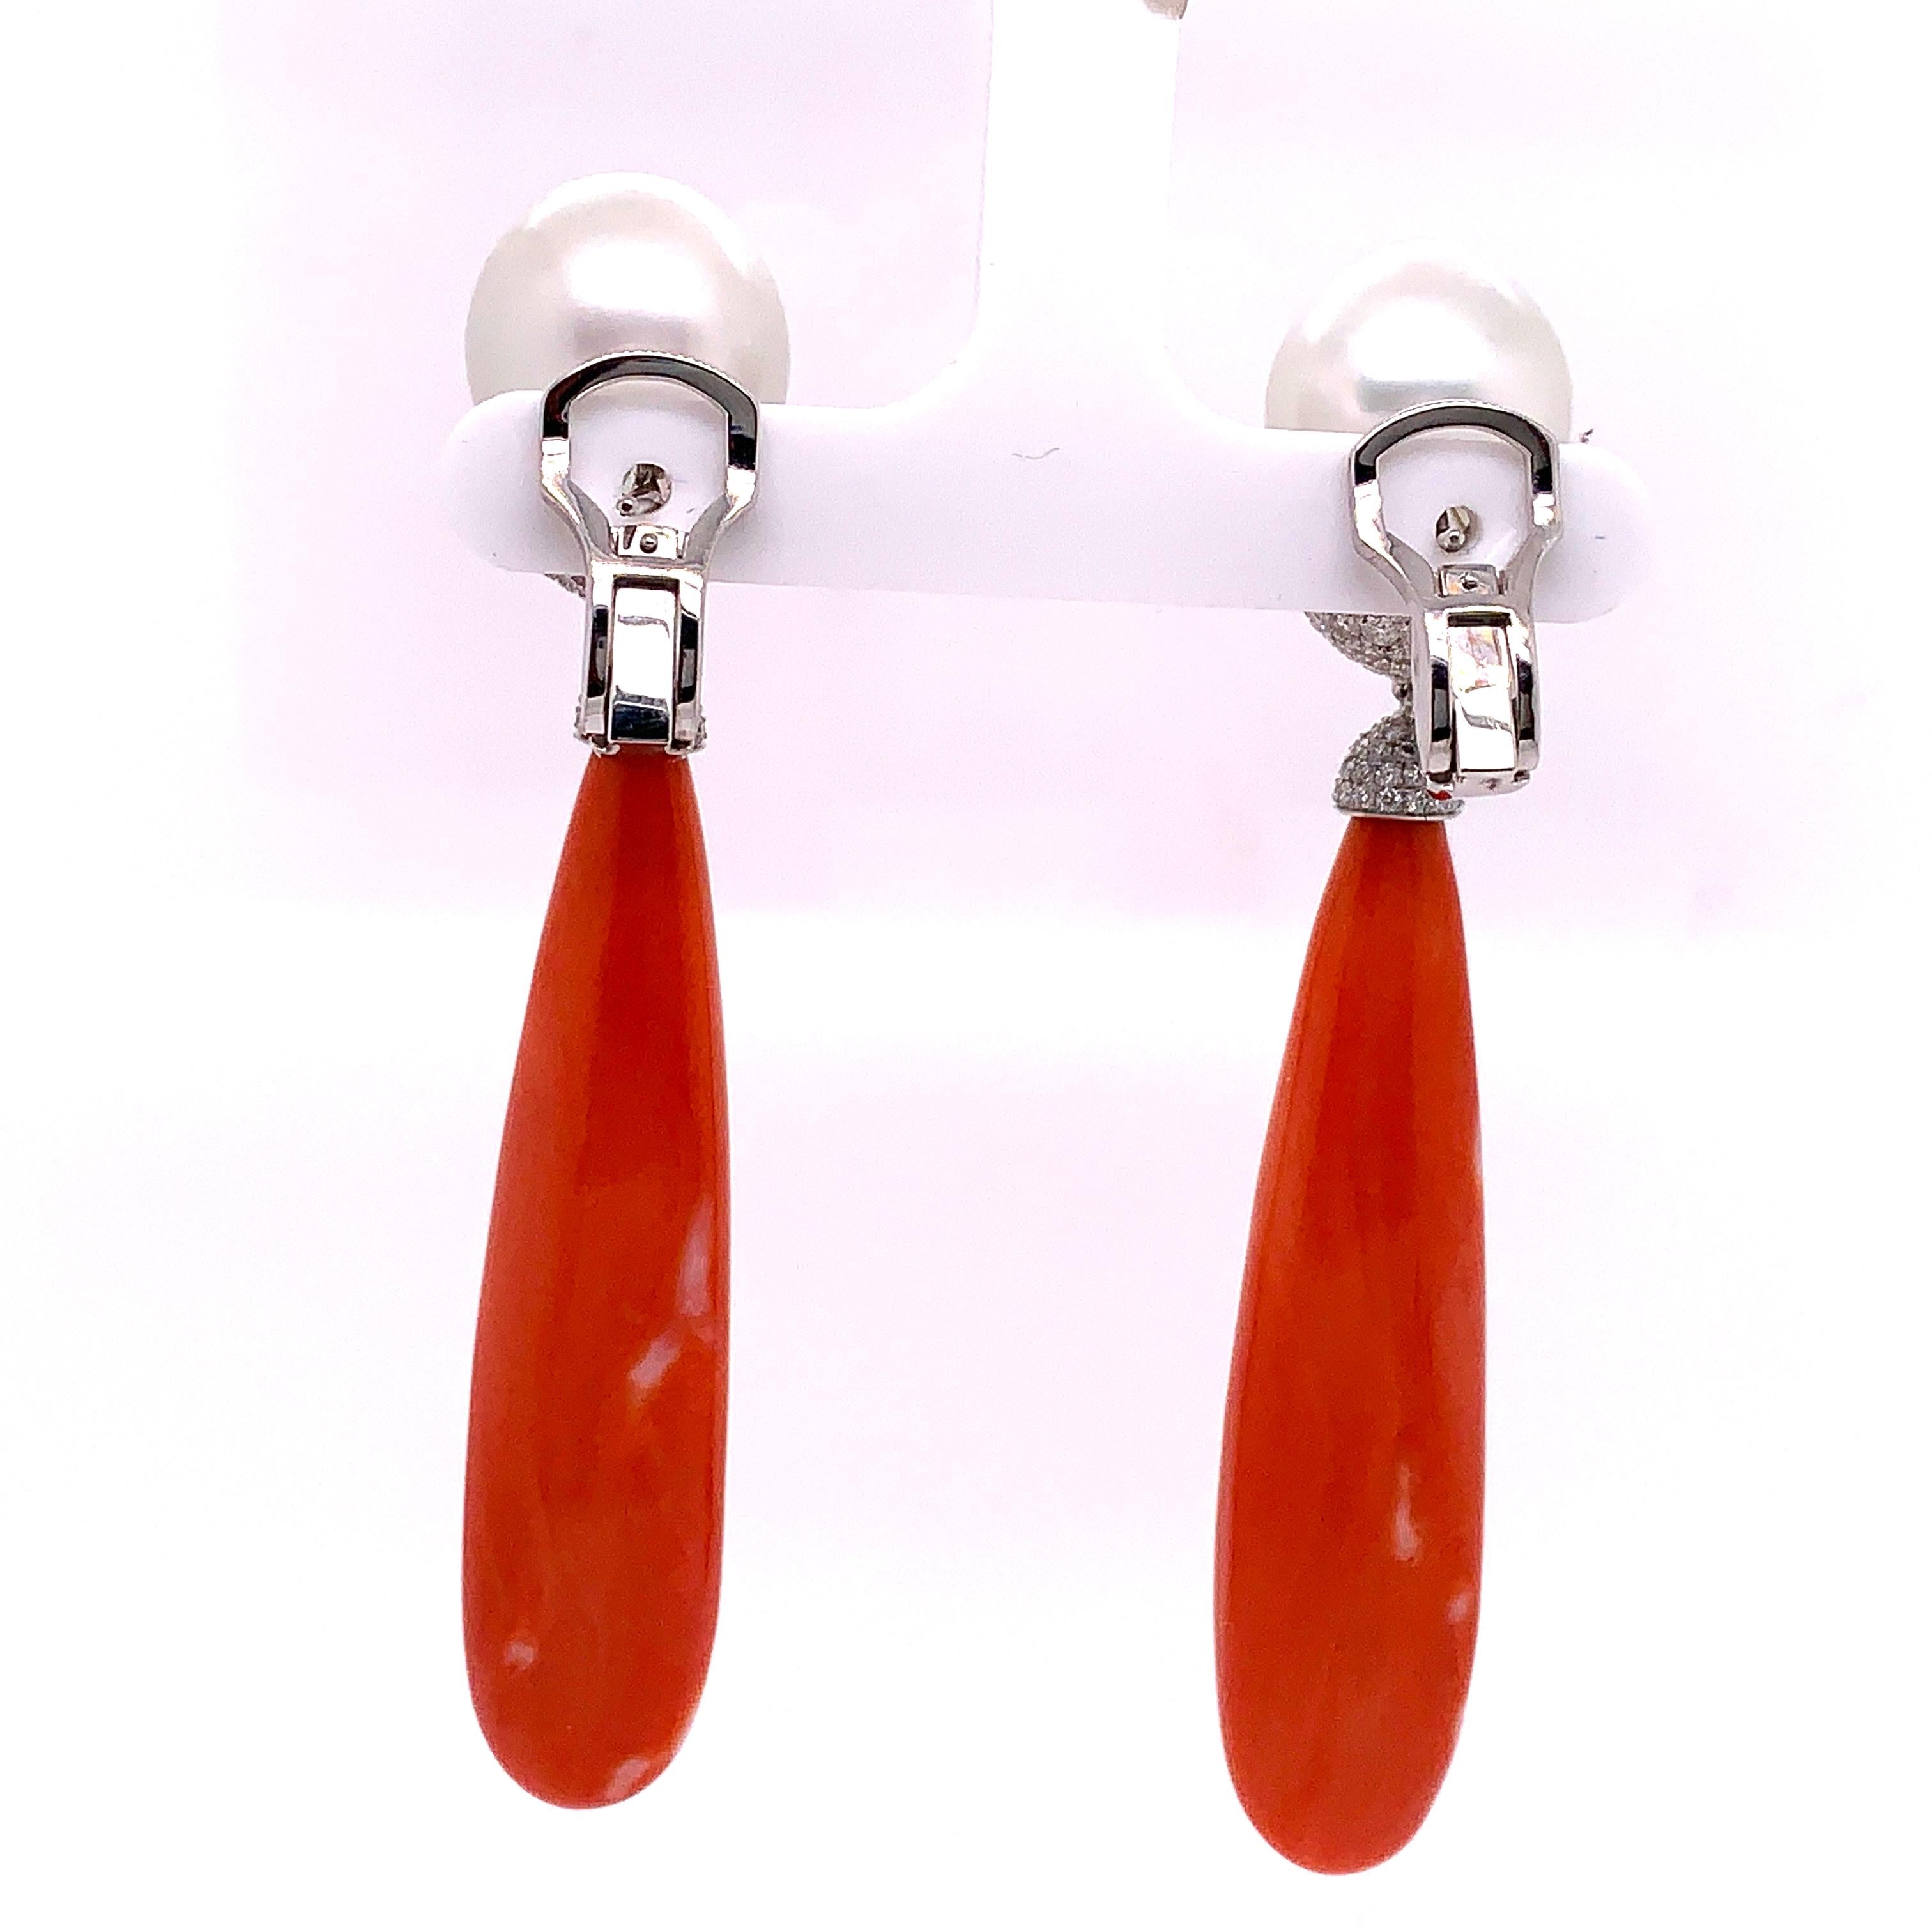 These unique coral and pearl drop earrings contain a pair of coral sticks with beautiful smooth and even color. Dangling from a pair of SOUTH SEA PEARLS (with measuremnets of 14.80-14.85 x 17.00mm and 14.35-14.40 x 17.95mm).

These natural oceanin